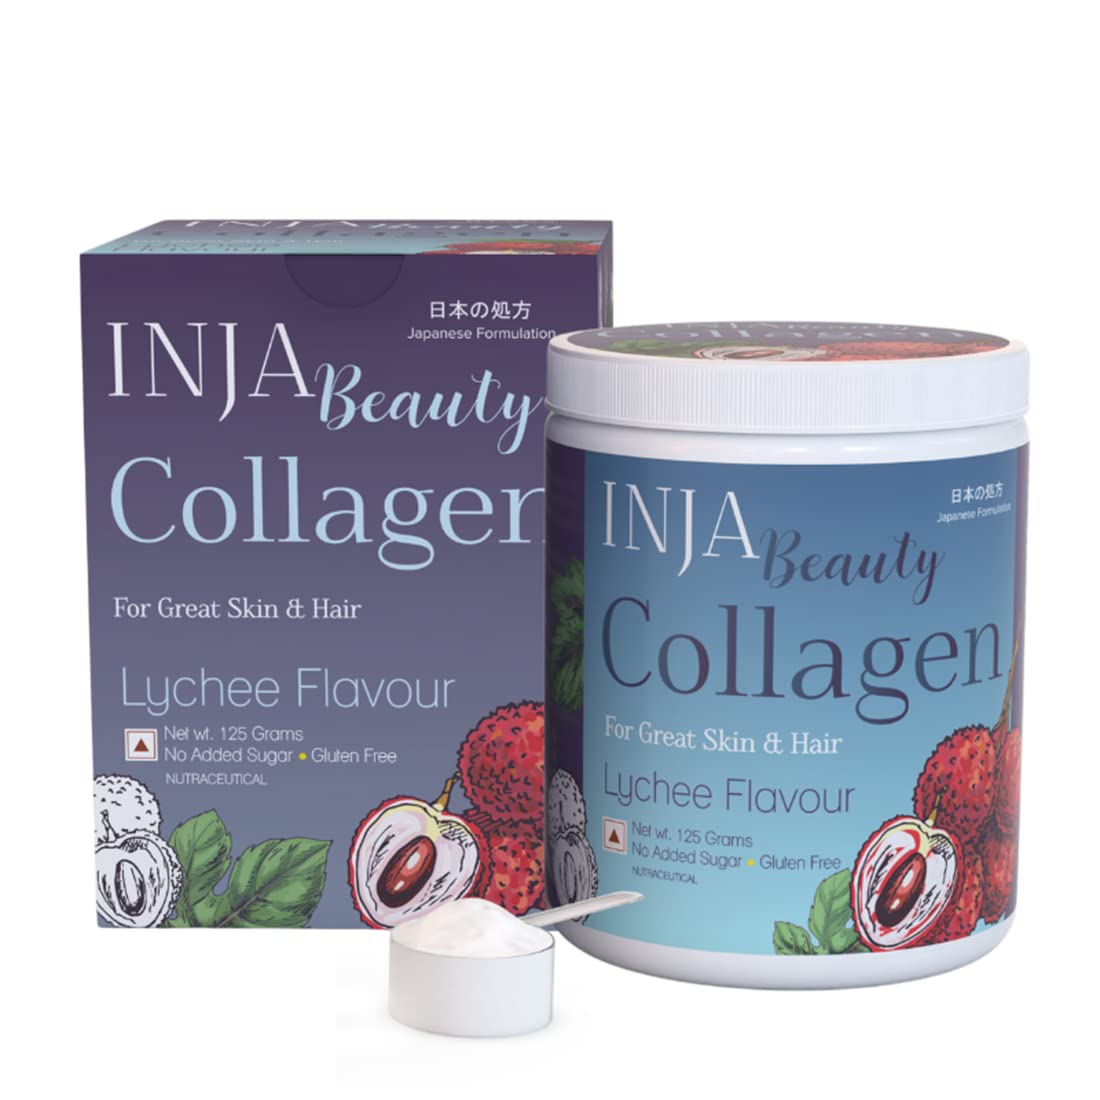 Buy INJA Beauty Collagen Lychee Flavour Powder for Great Skin & Hair, 125 gm Online